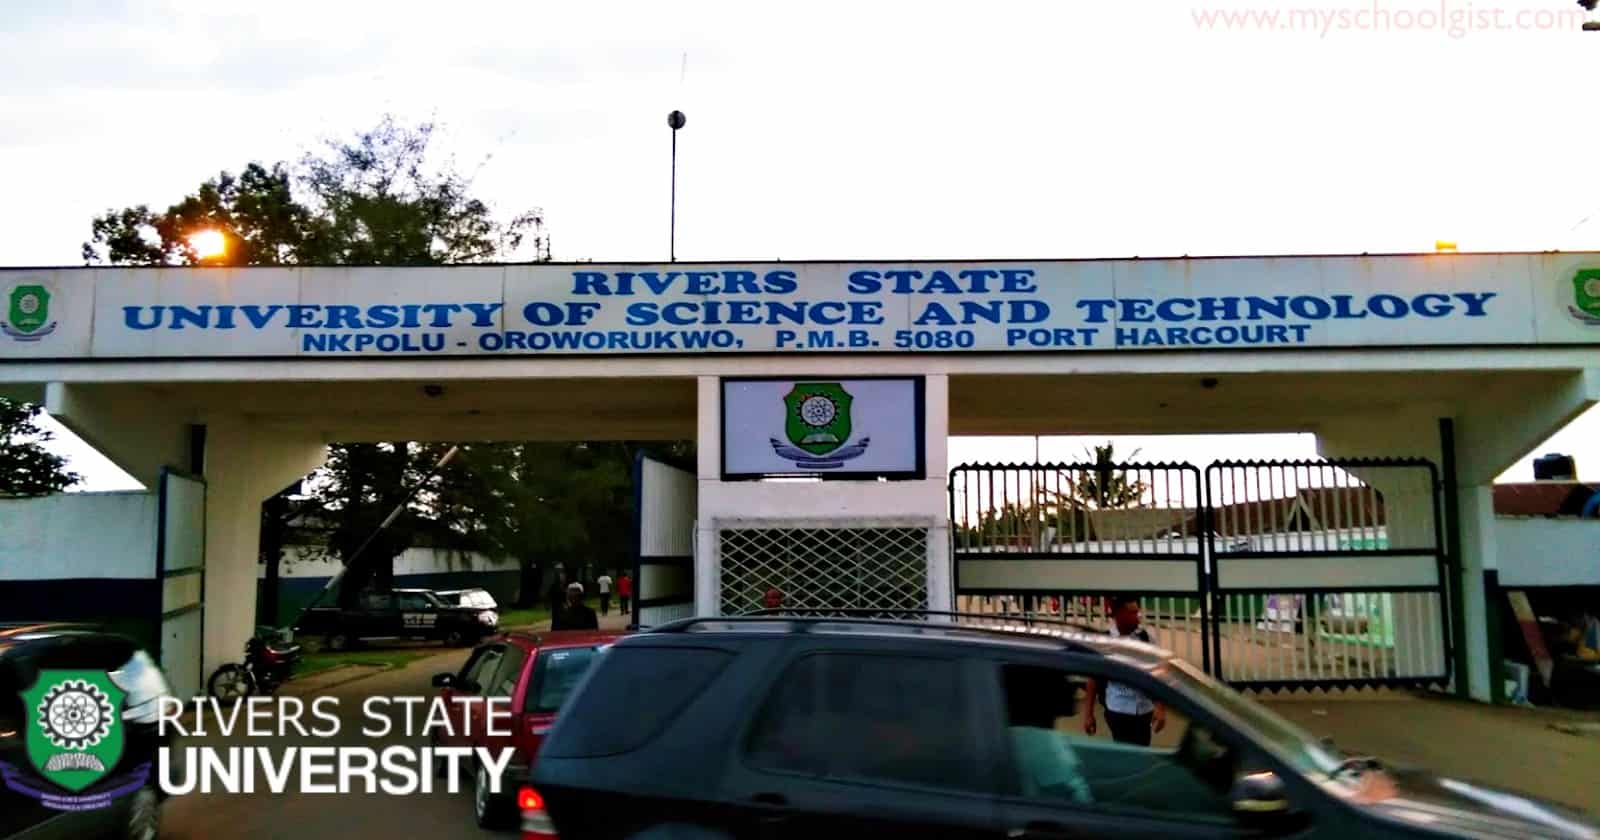 Rivers State University (RSU) Clearance Exercise for New Students